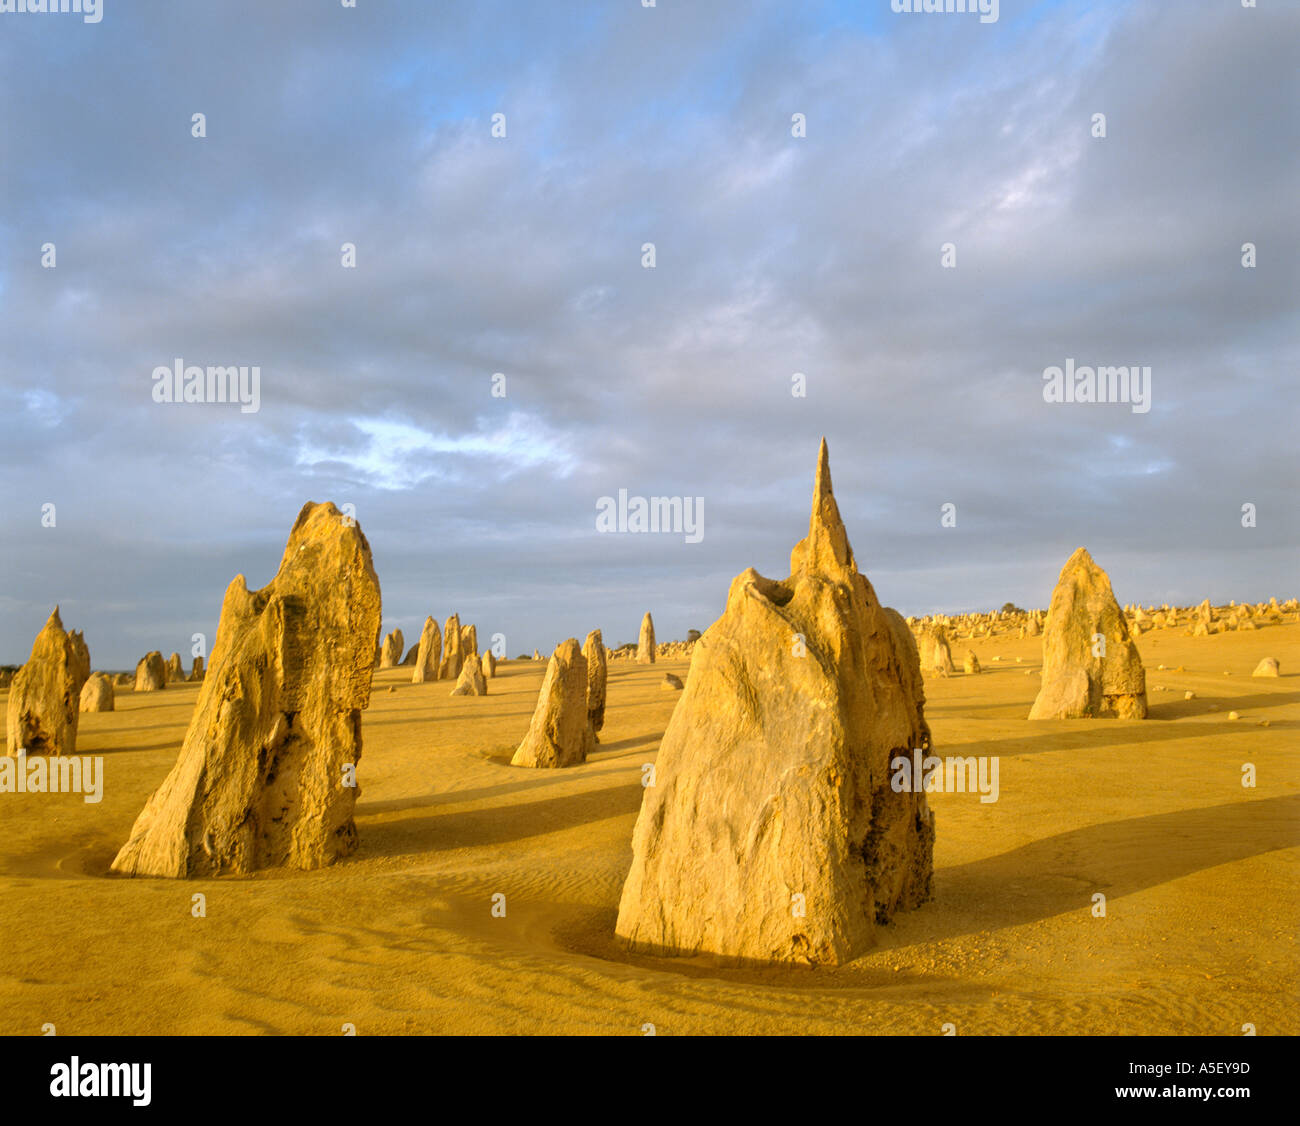 The Pinnacles in the early evening after a storm, Nambung National Park, Western Australia, Australia Stock Photo